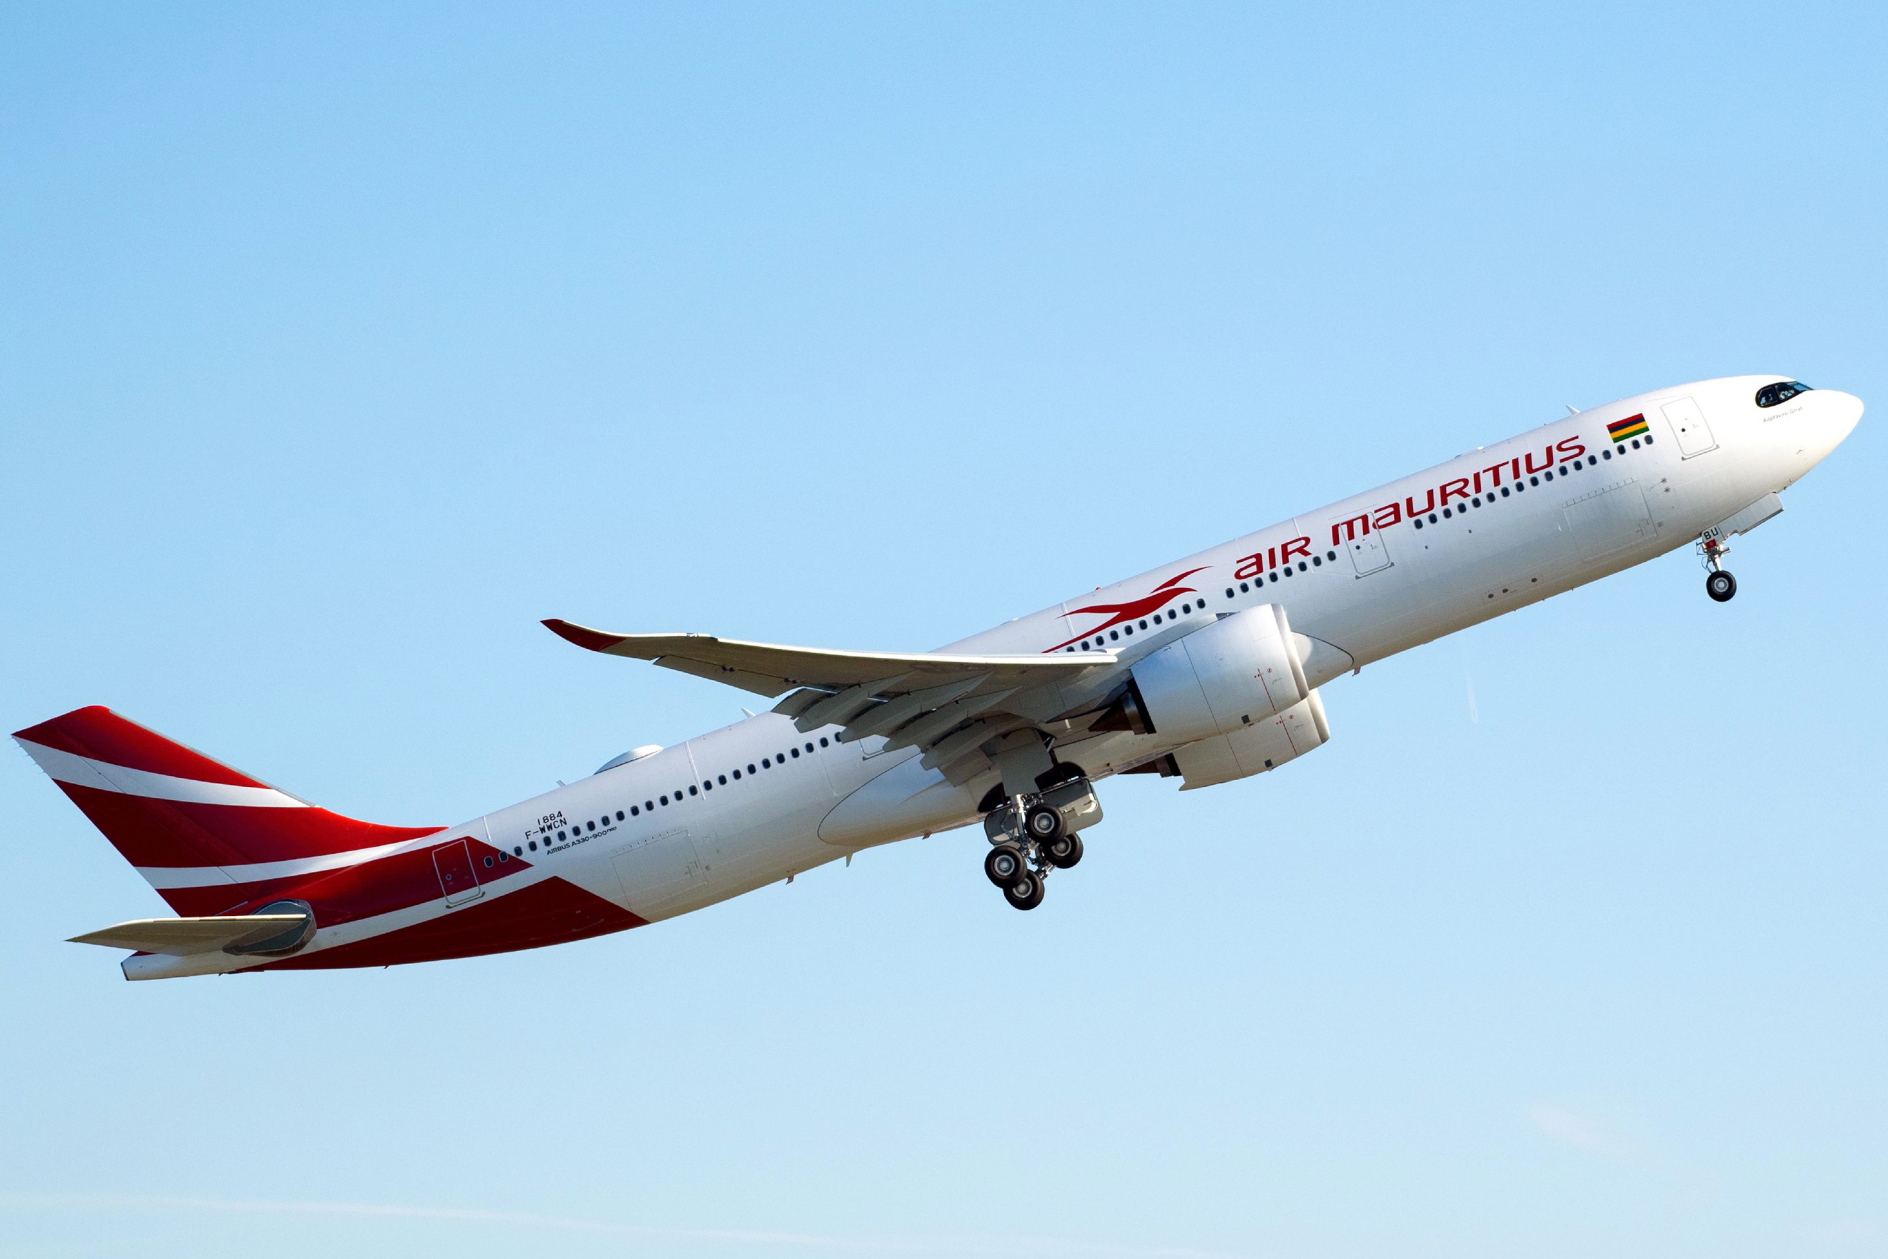 Air Mauritius Airbus A330-900neo. Click to enlarge.